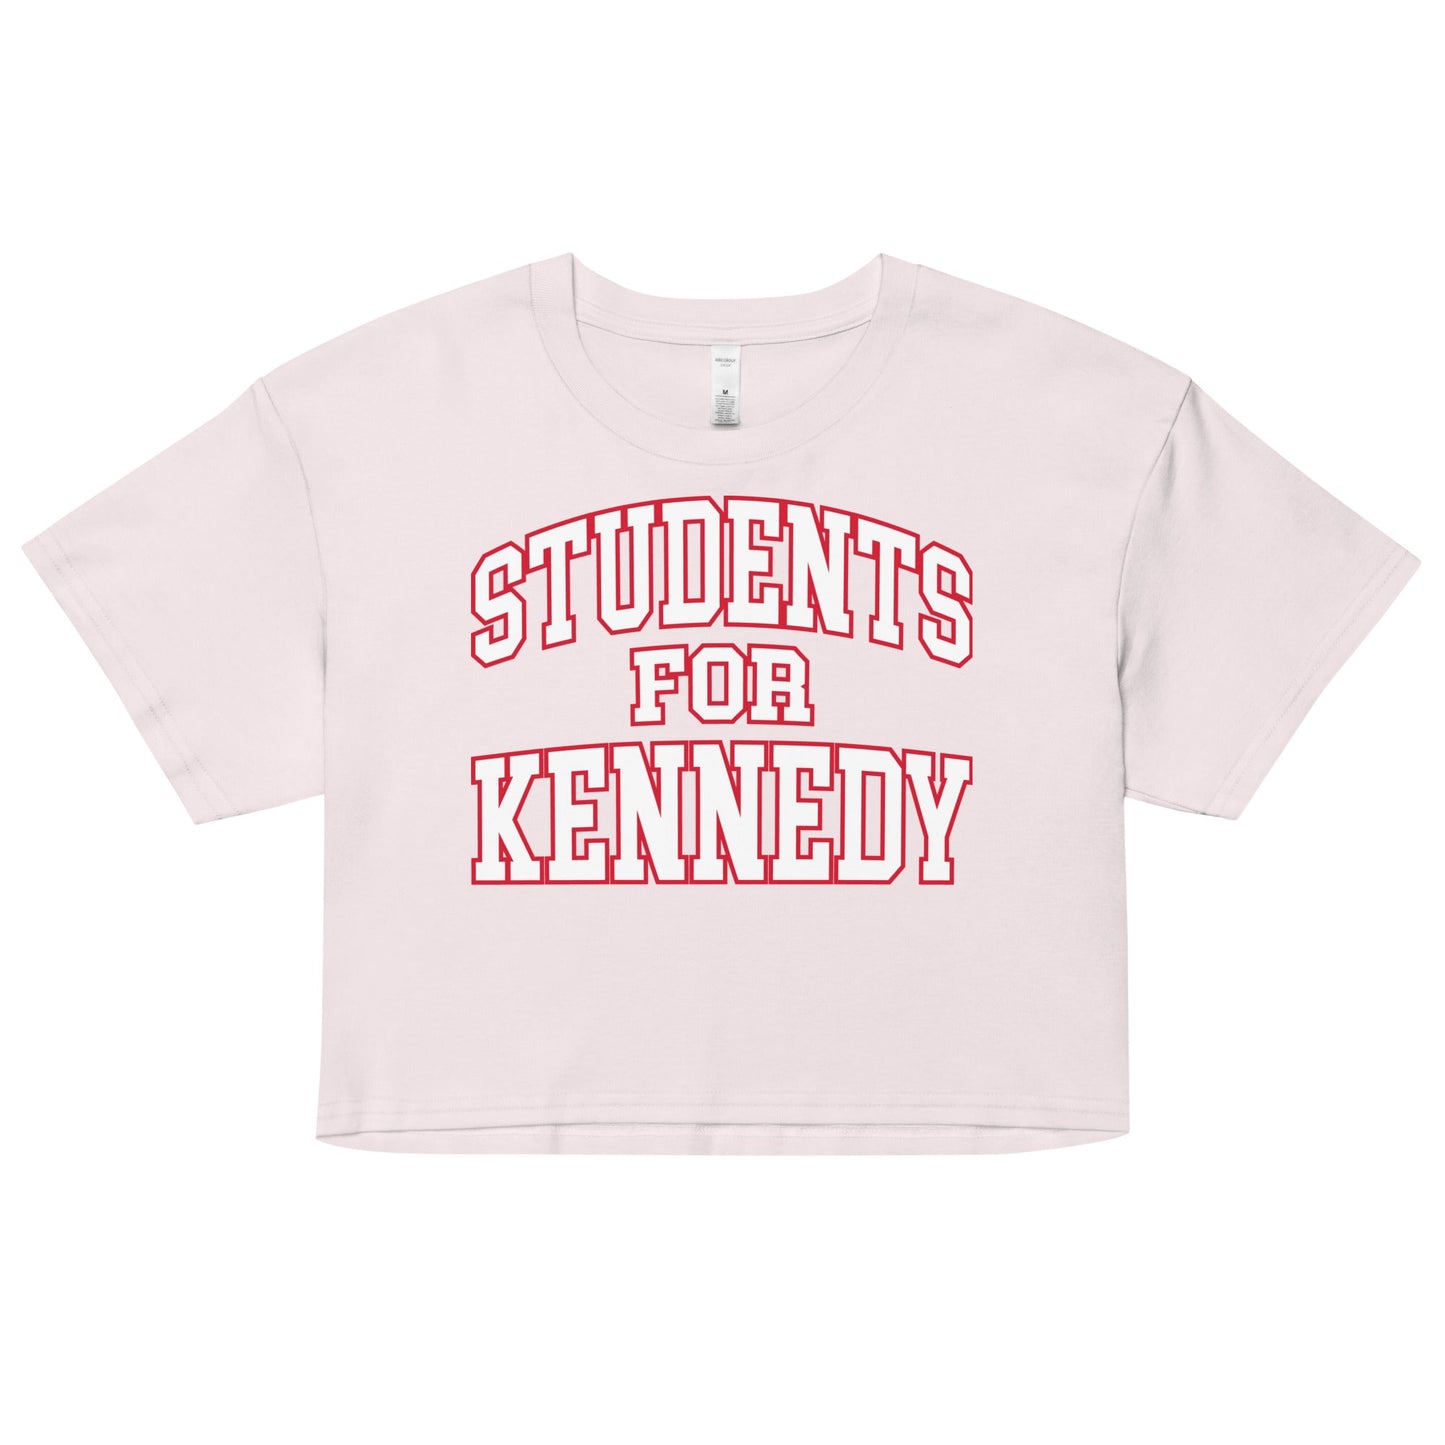 Students for Kennedy Women’s crop top - TEAM KENNEDY. All rights reserved